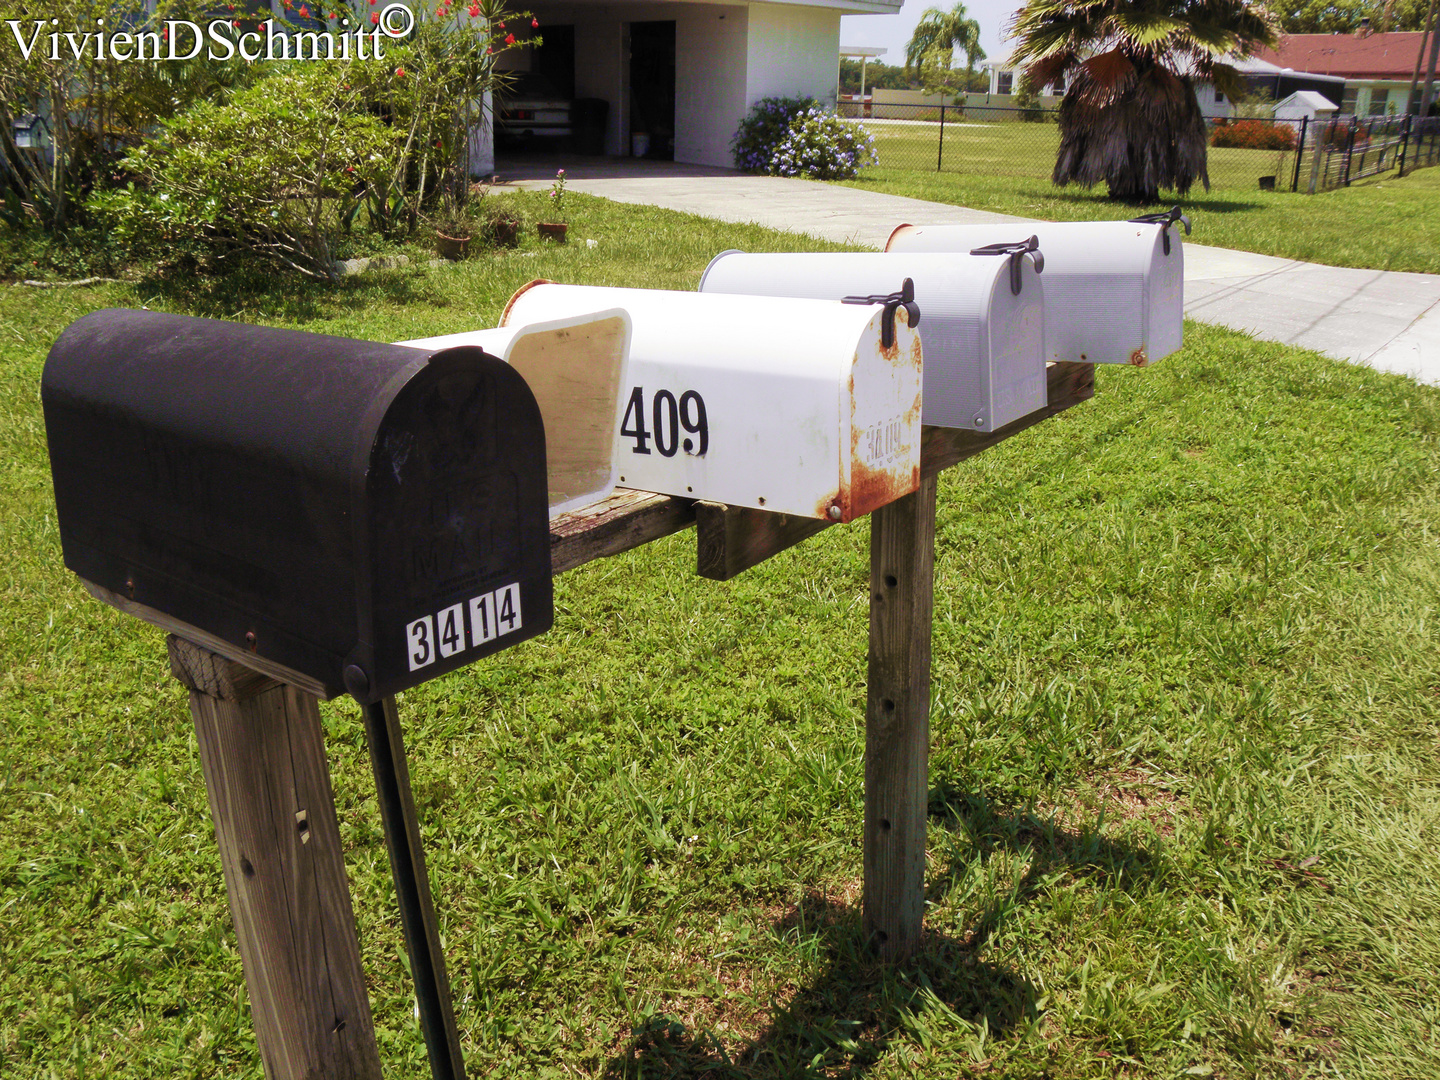 American Postboxes